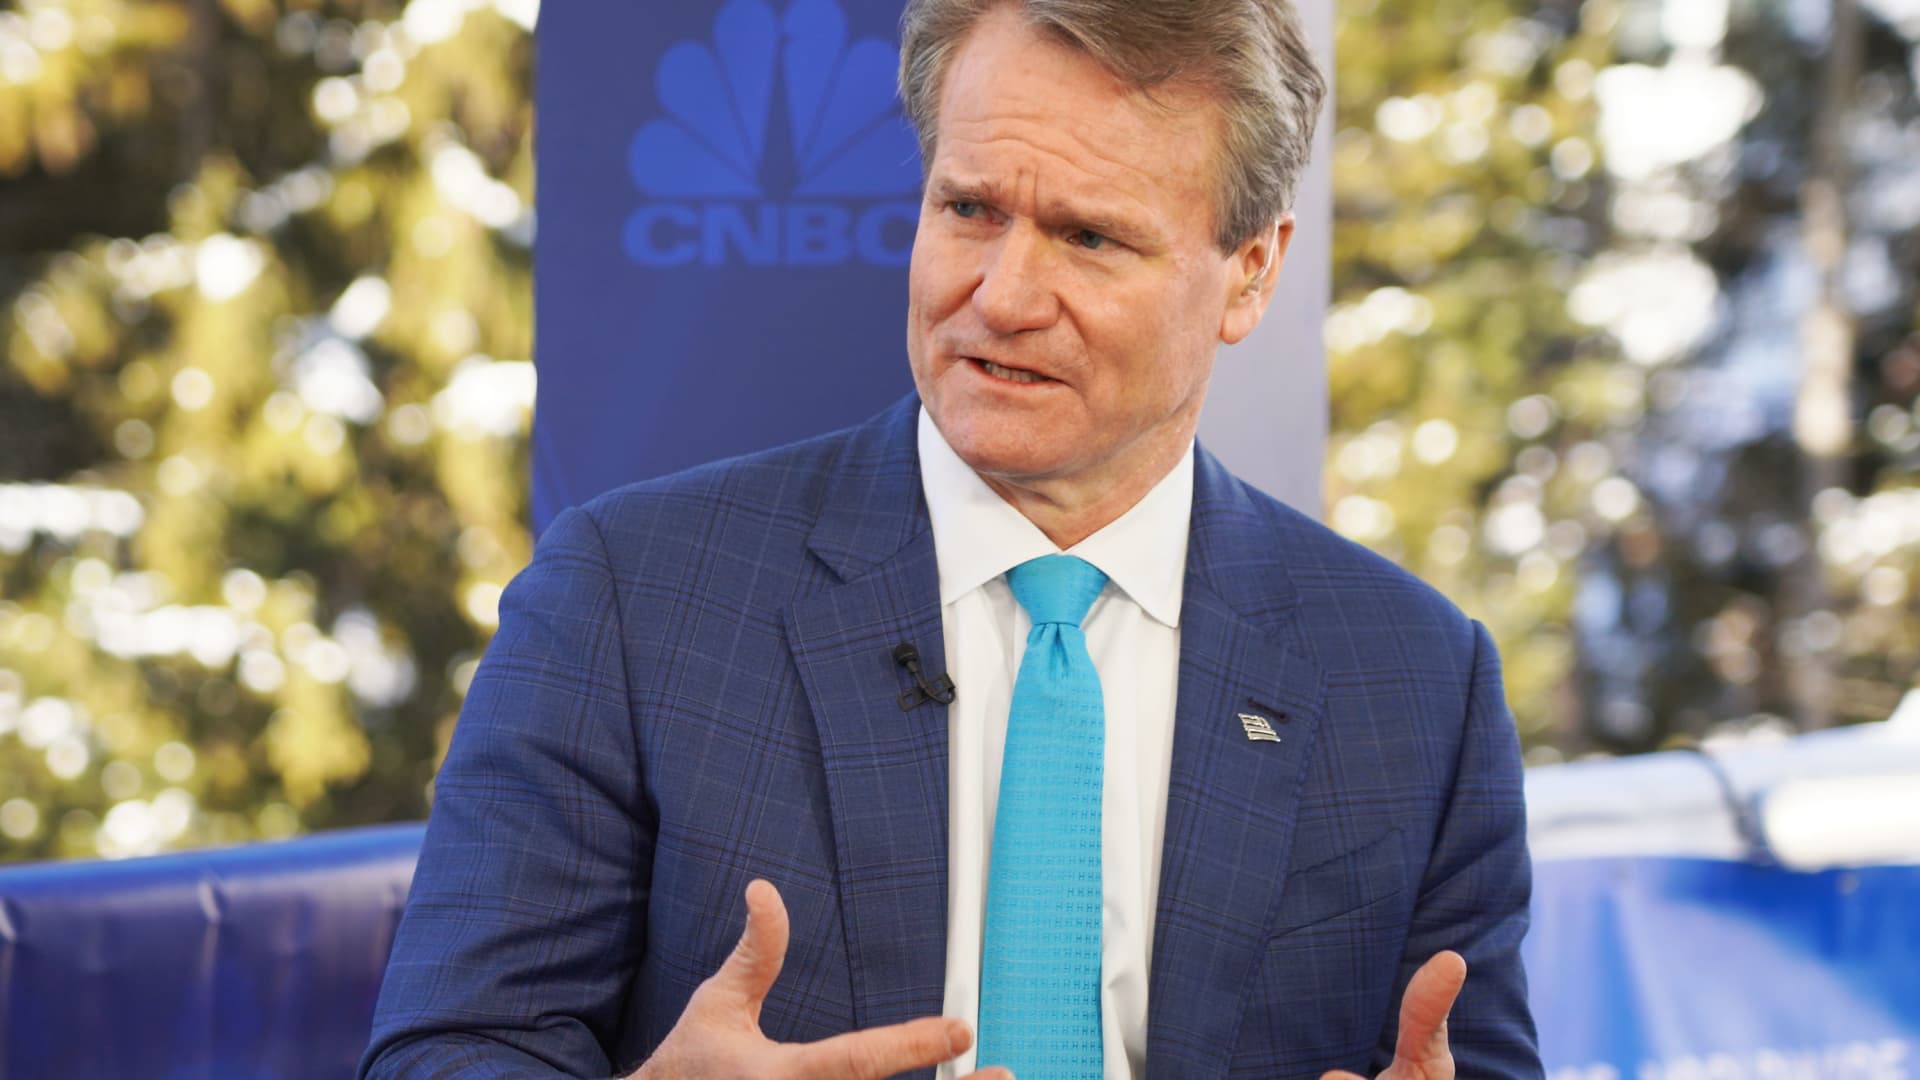 BofA CEO says the strong American consumer is one of the Fed’s biggest obstacles